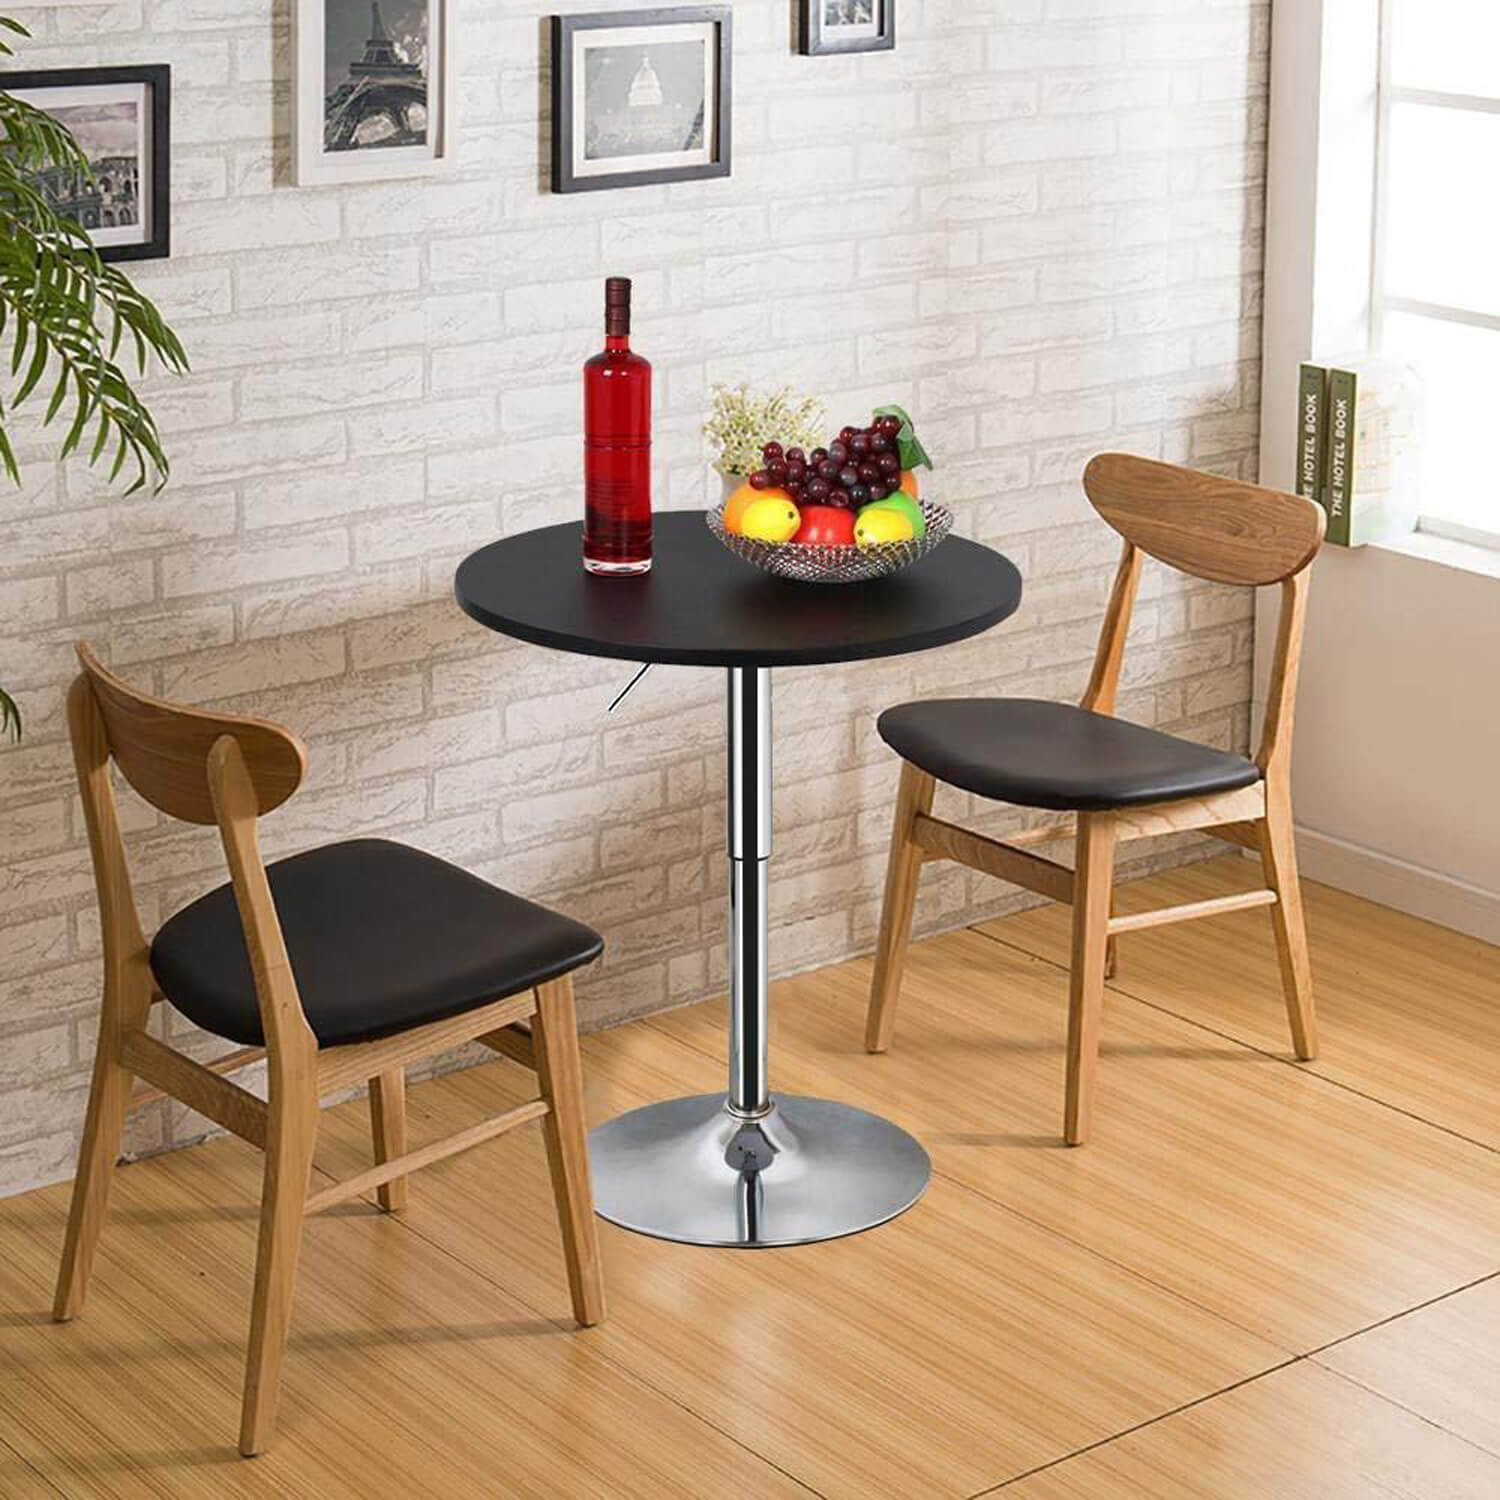 Elecwish Bar Table Black Bar Table OW003 with stools usage scene